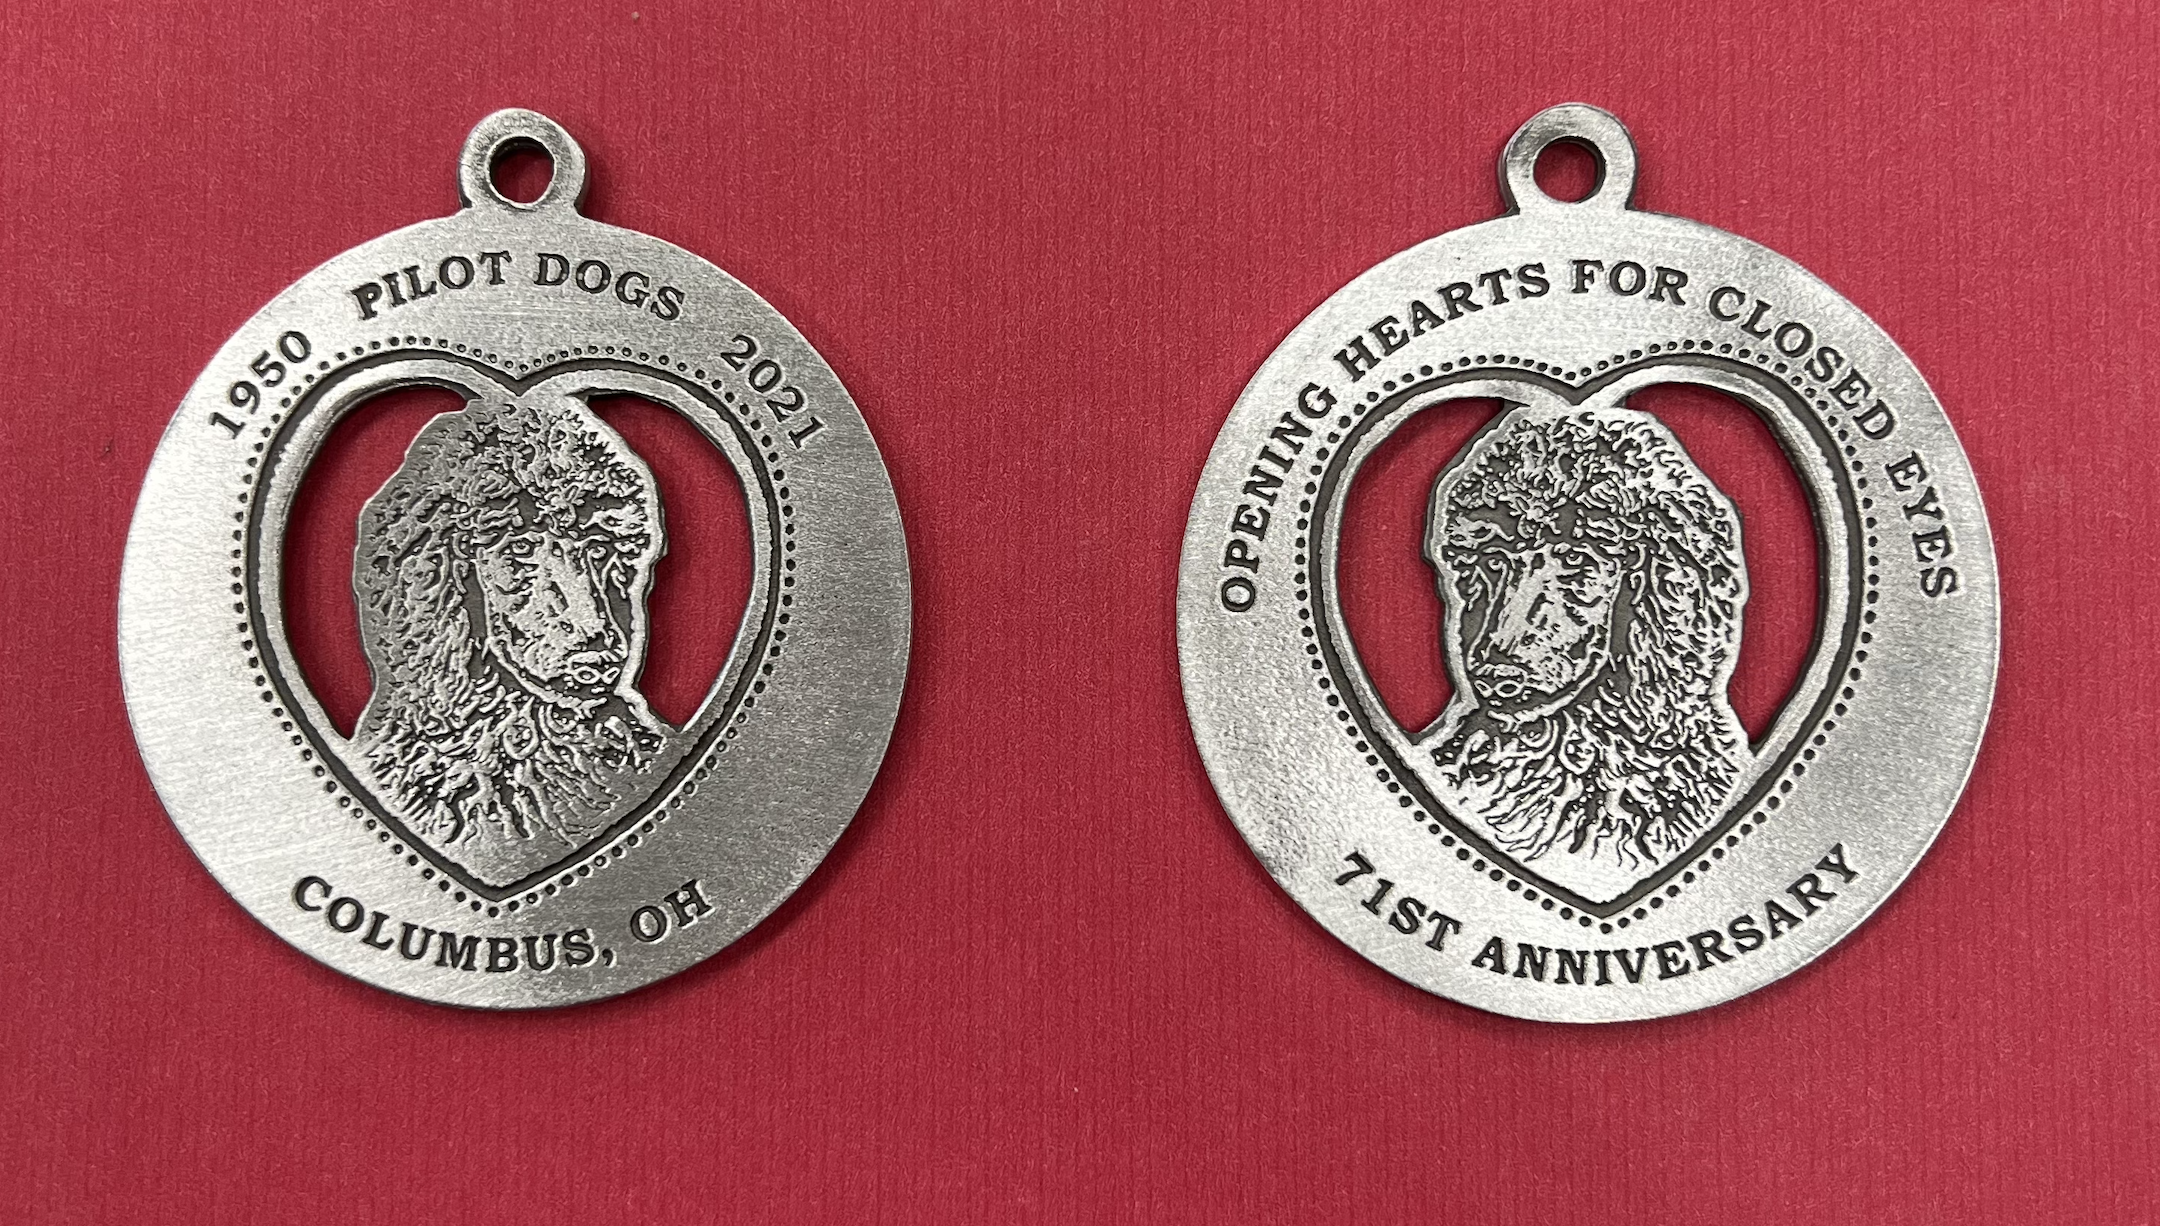 Two Ornaments to show both sides of the Standard Poodle Pewter Ornament. One side has 1950 Pilot Dogs 2021 above the engraved poodle headshot and Columbus, OH below. The other side has Opening hearts for closed eyes above the engraved poodle headshot and 71st Anniversary below.